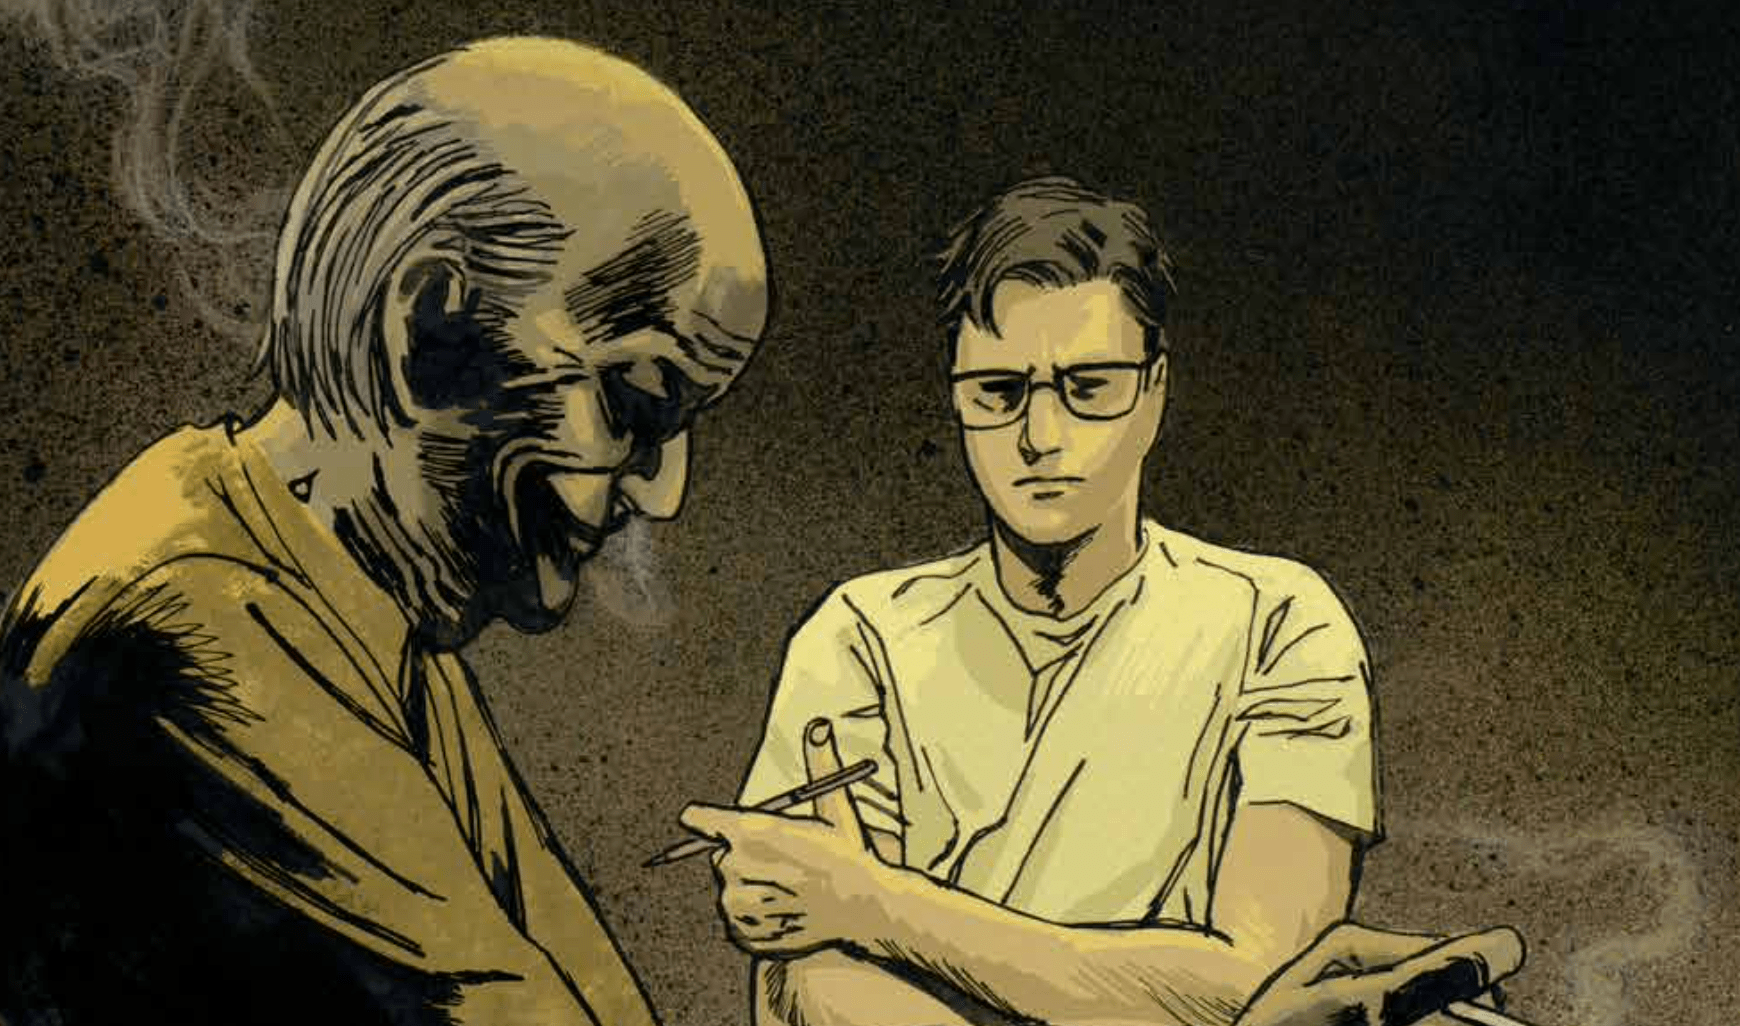 ‘The Deviant’ #4 is a great character study